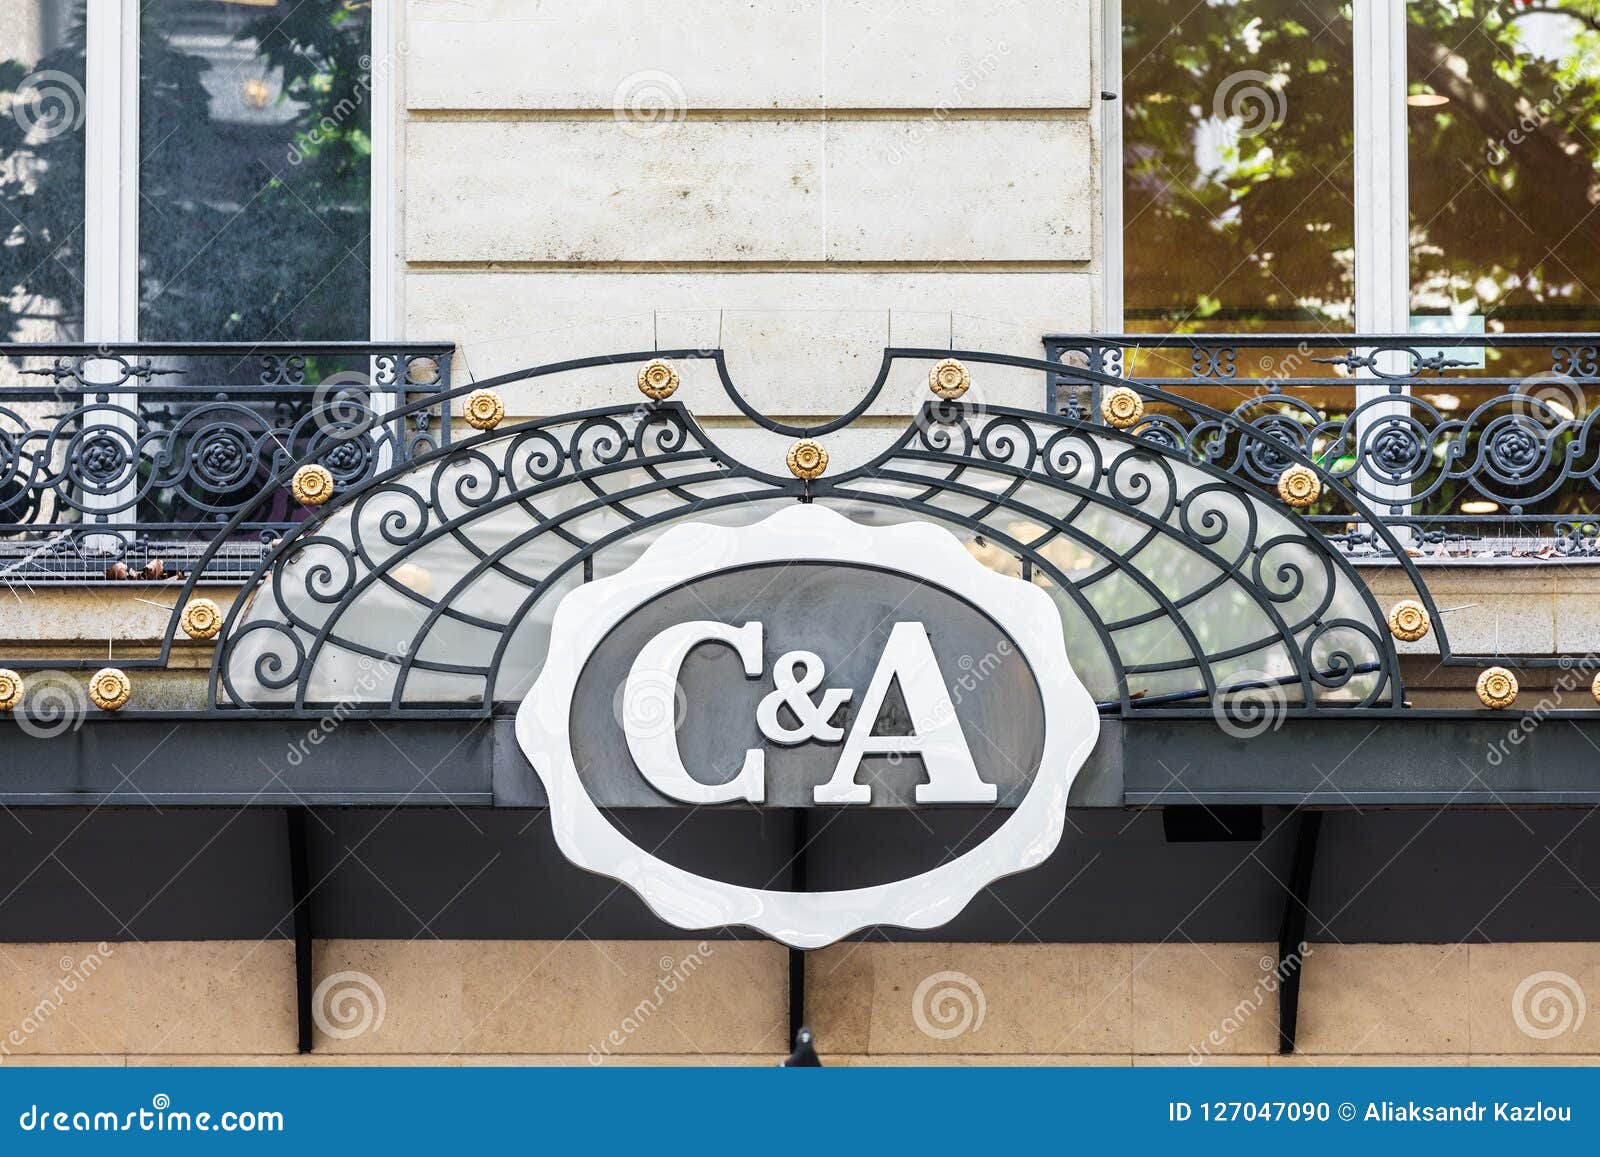 The C&a Sign and Logo. Paris, France Editorial Image - Image of ...